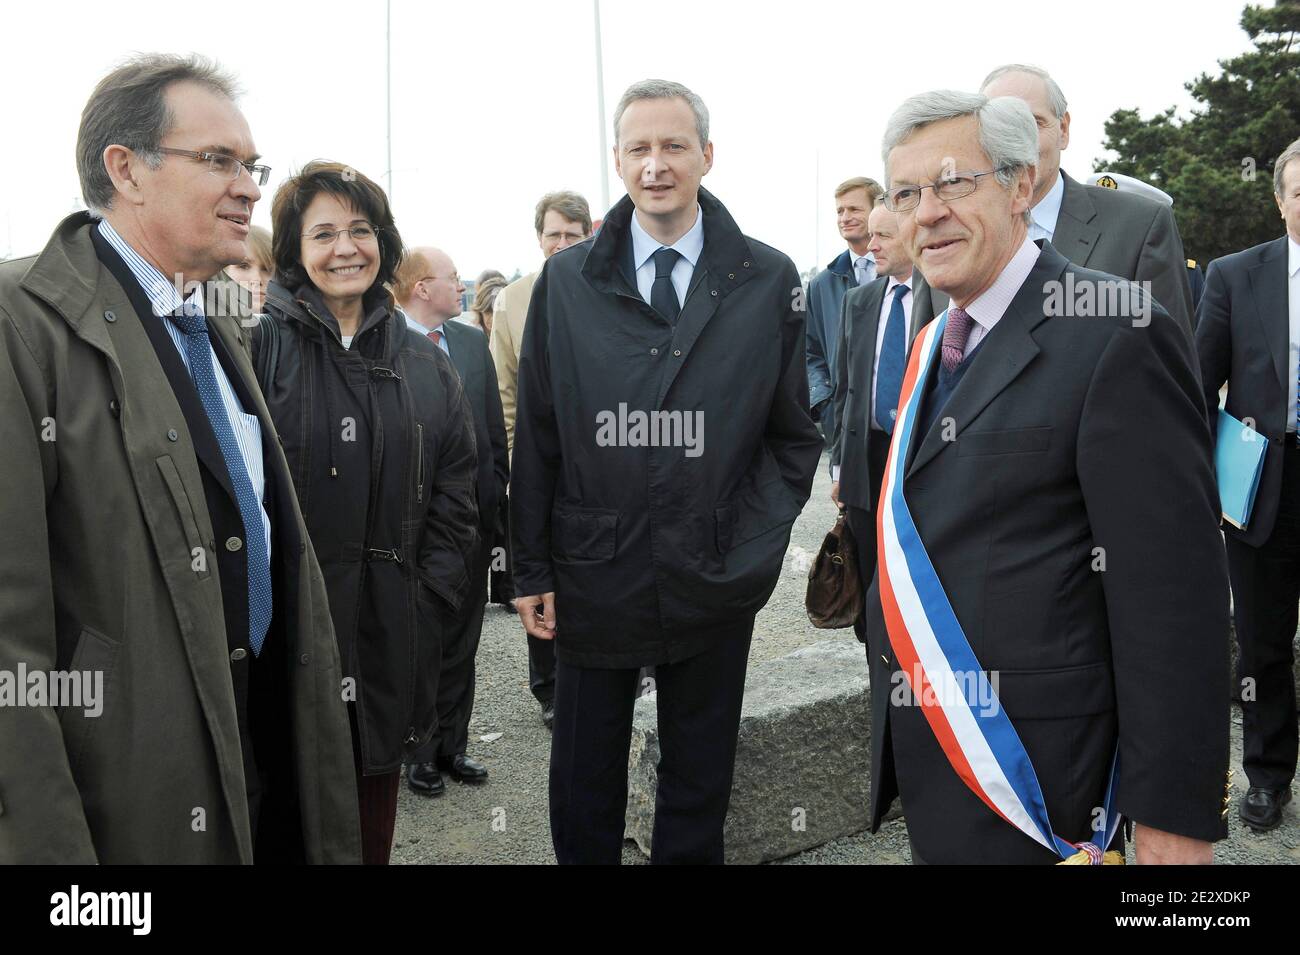 European deputy Alain Cadec, French Minister for Agriculture, Fisheries and Food Bruno Le Maire and EU fisheries and maritime affairs commissioner Maria Damanaki meet fischermen in Saint-Quay Portrieux, France on May 7, 2010. Bruno Le Maire and Maria Damanaki meet professionals of fishing in Brittany. Photo Thierry Orban/ABACAPRESS.COM Stock Photo